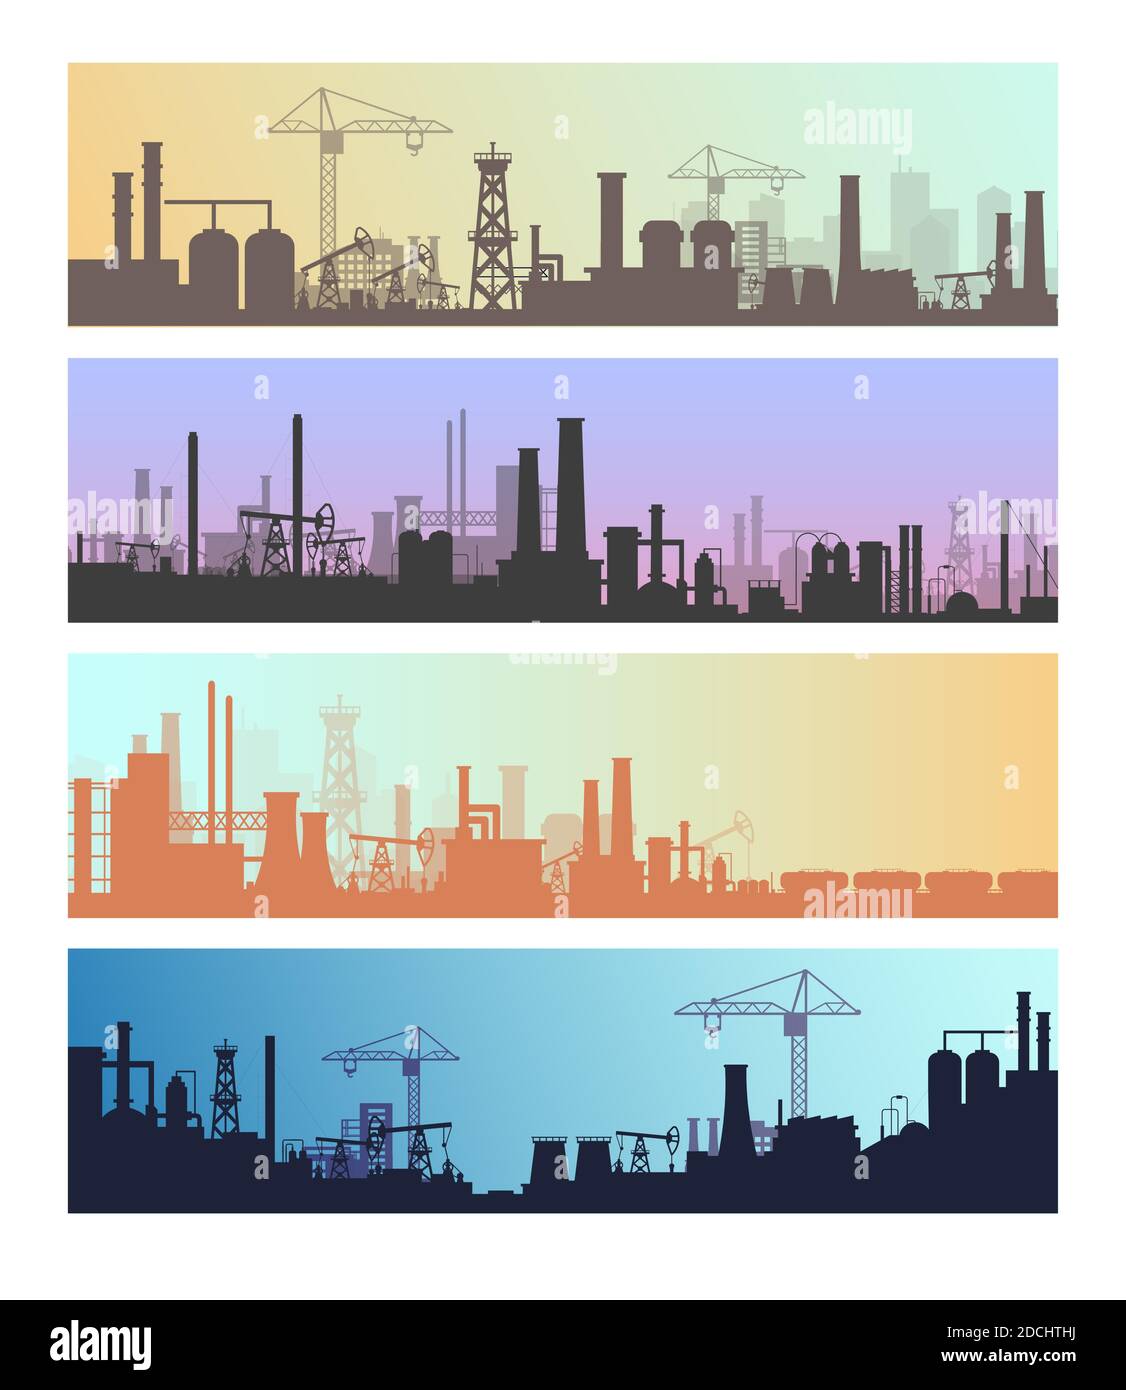 Manufacture industrial landscapes vector illustrations, cartoon flat urban refinery panorama skyline set, oil refinery industry silhouettes Stock Vector